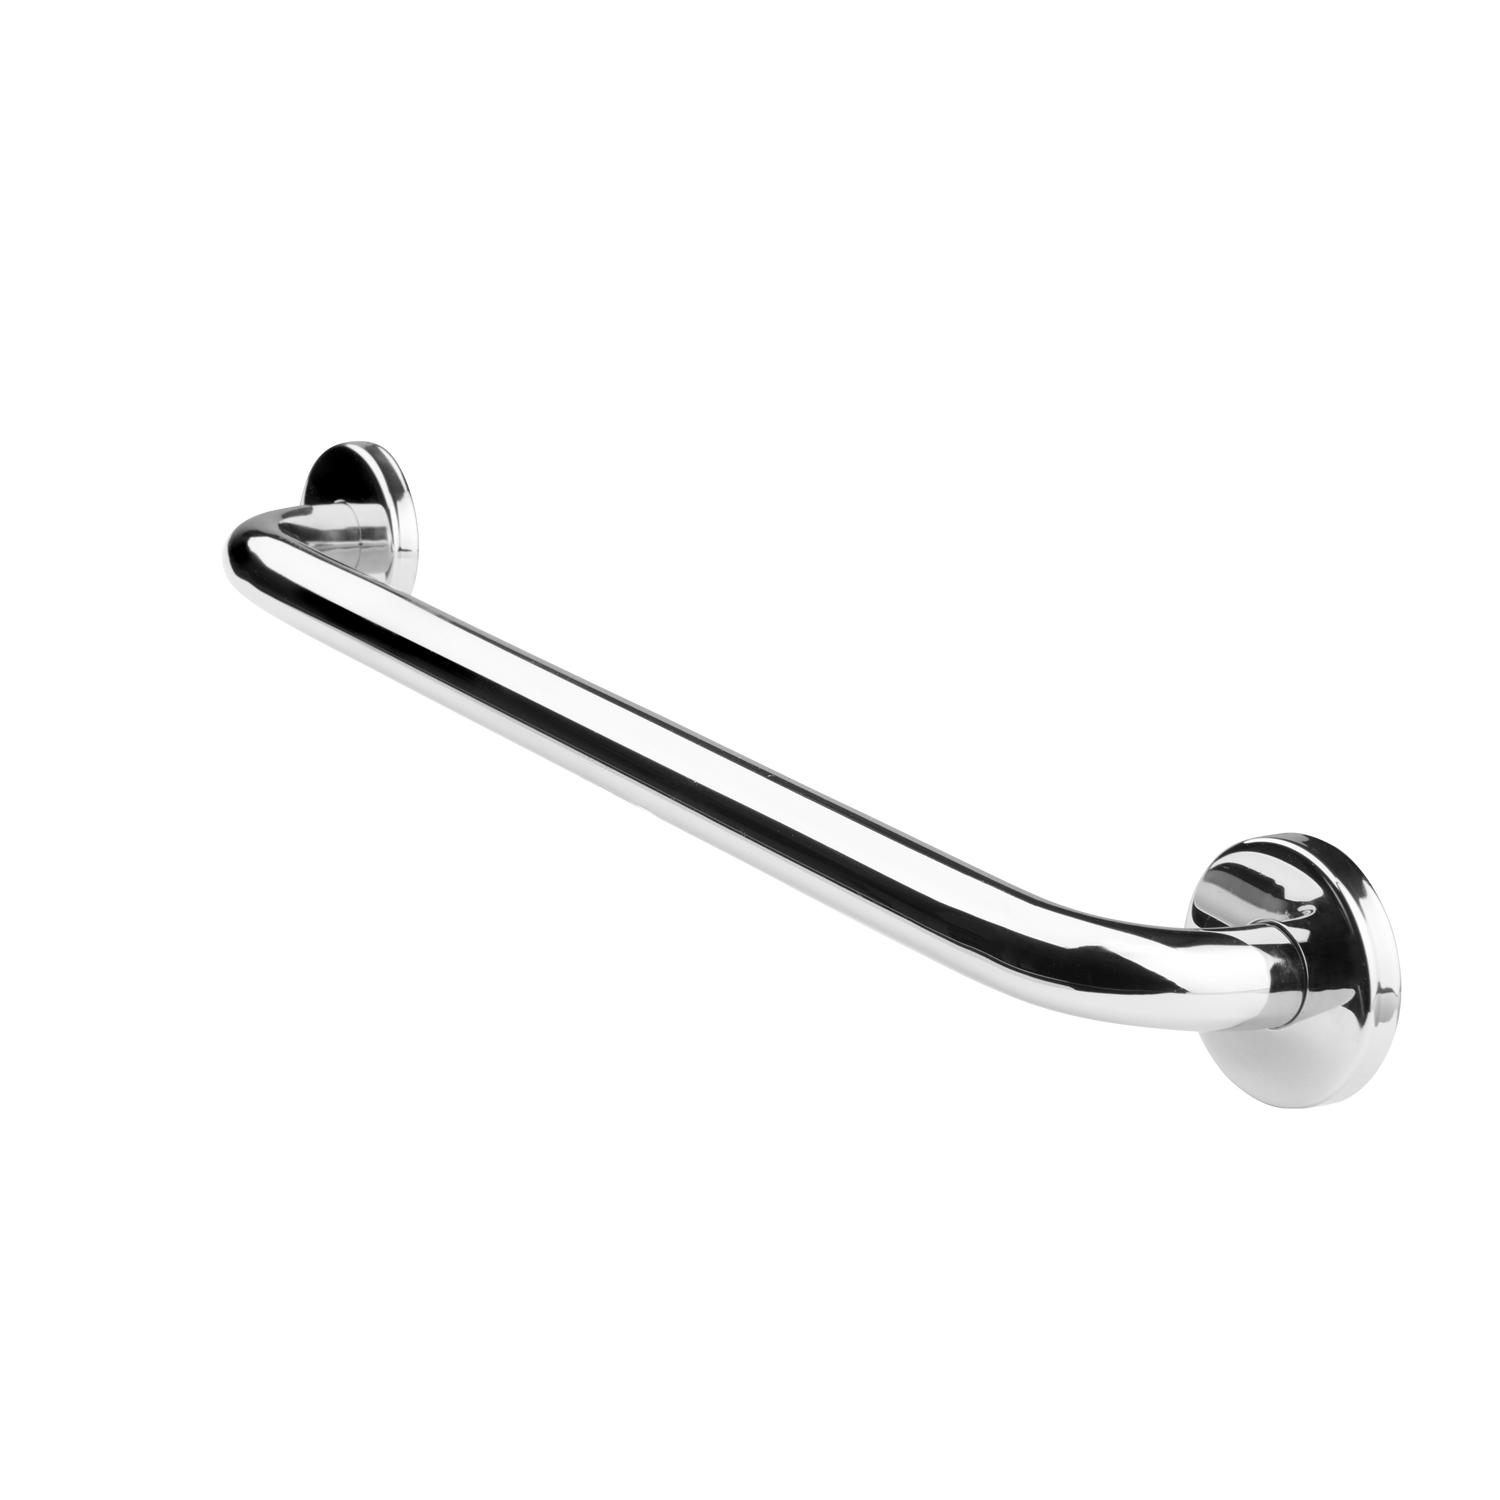 SecuCare Grab Bar ø25 mm polished stainless steel